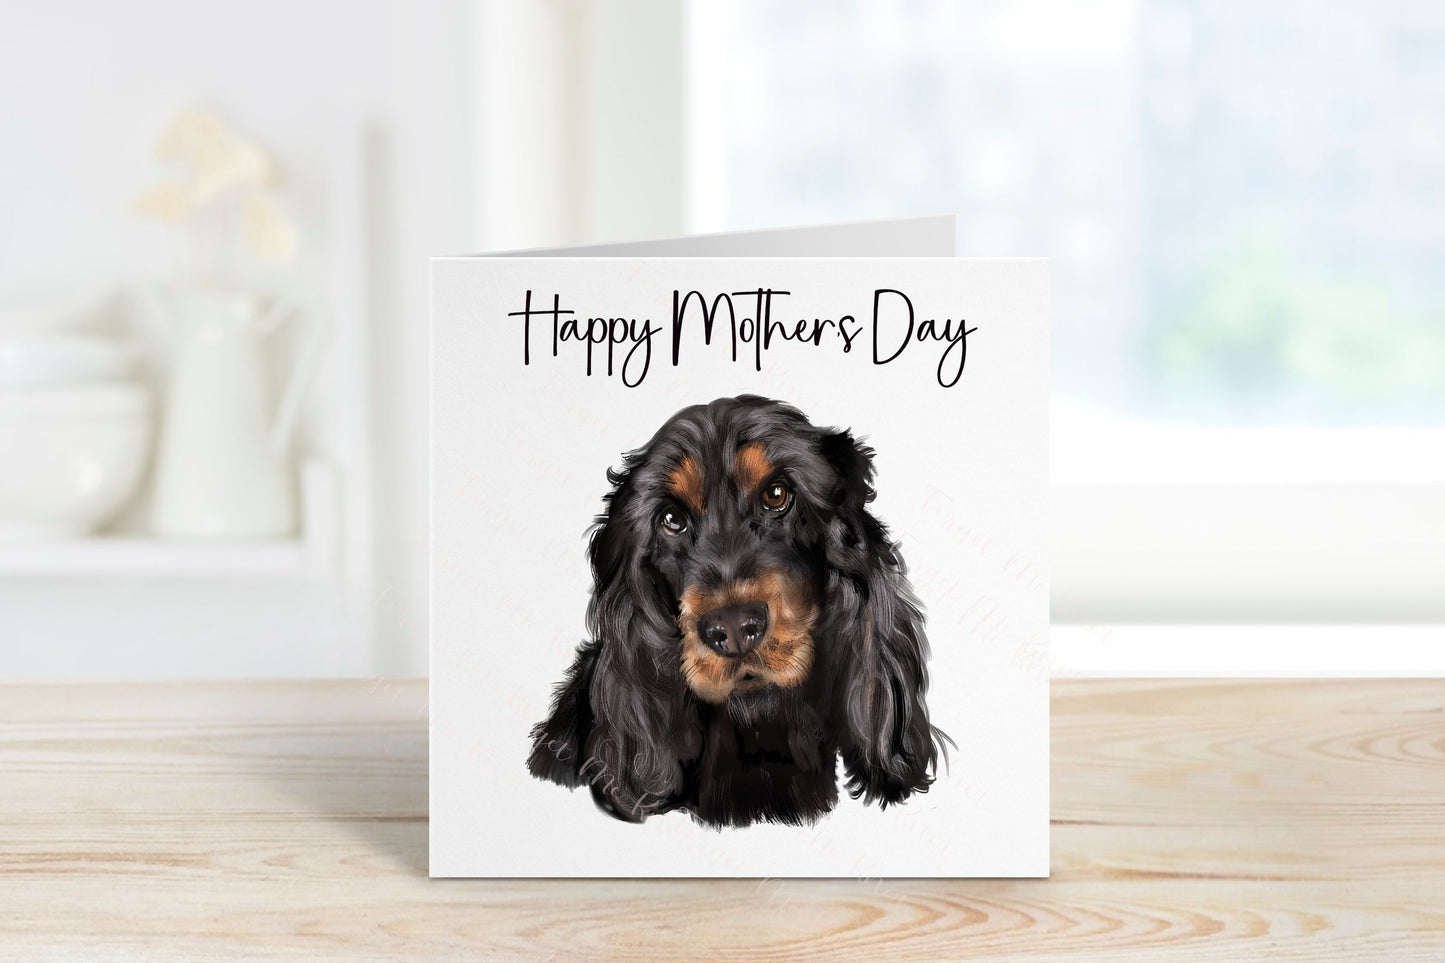 Dog Mothers Day Card, Dog Mum Card, Mothers Day Card For Nan, Mothers Day Card For Nanny, Bulldog Mothers Day Card For Mom